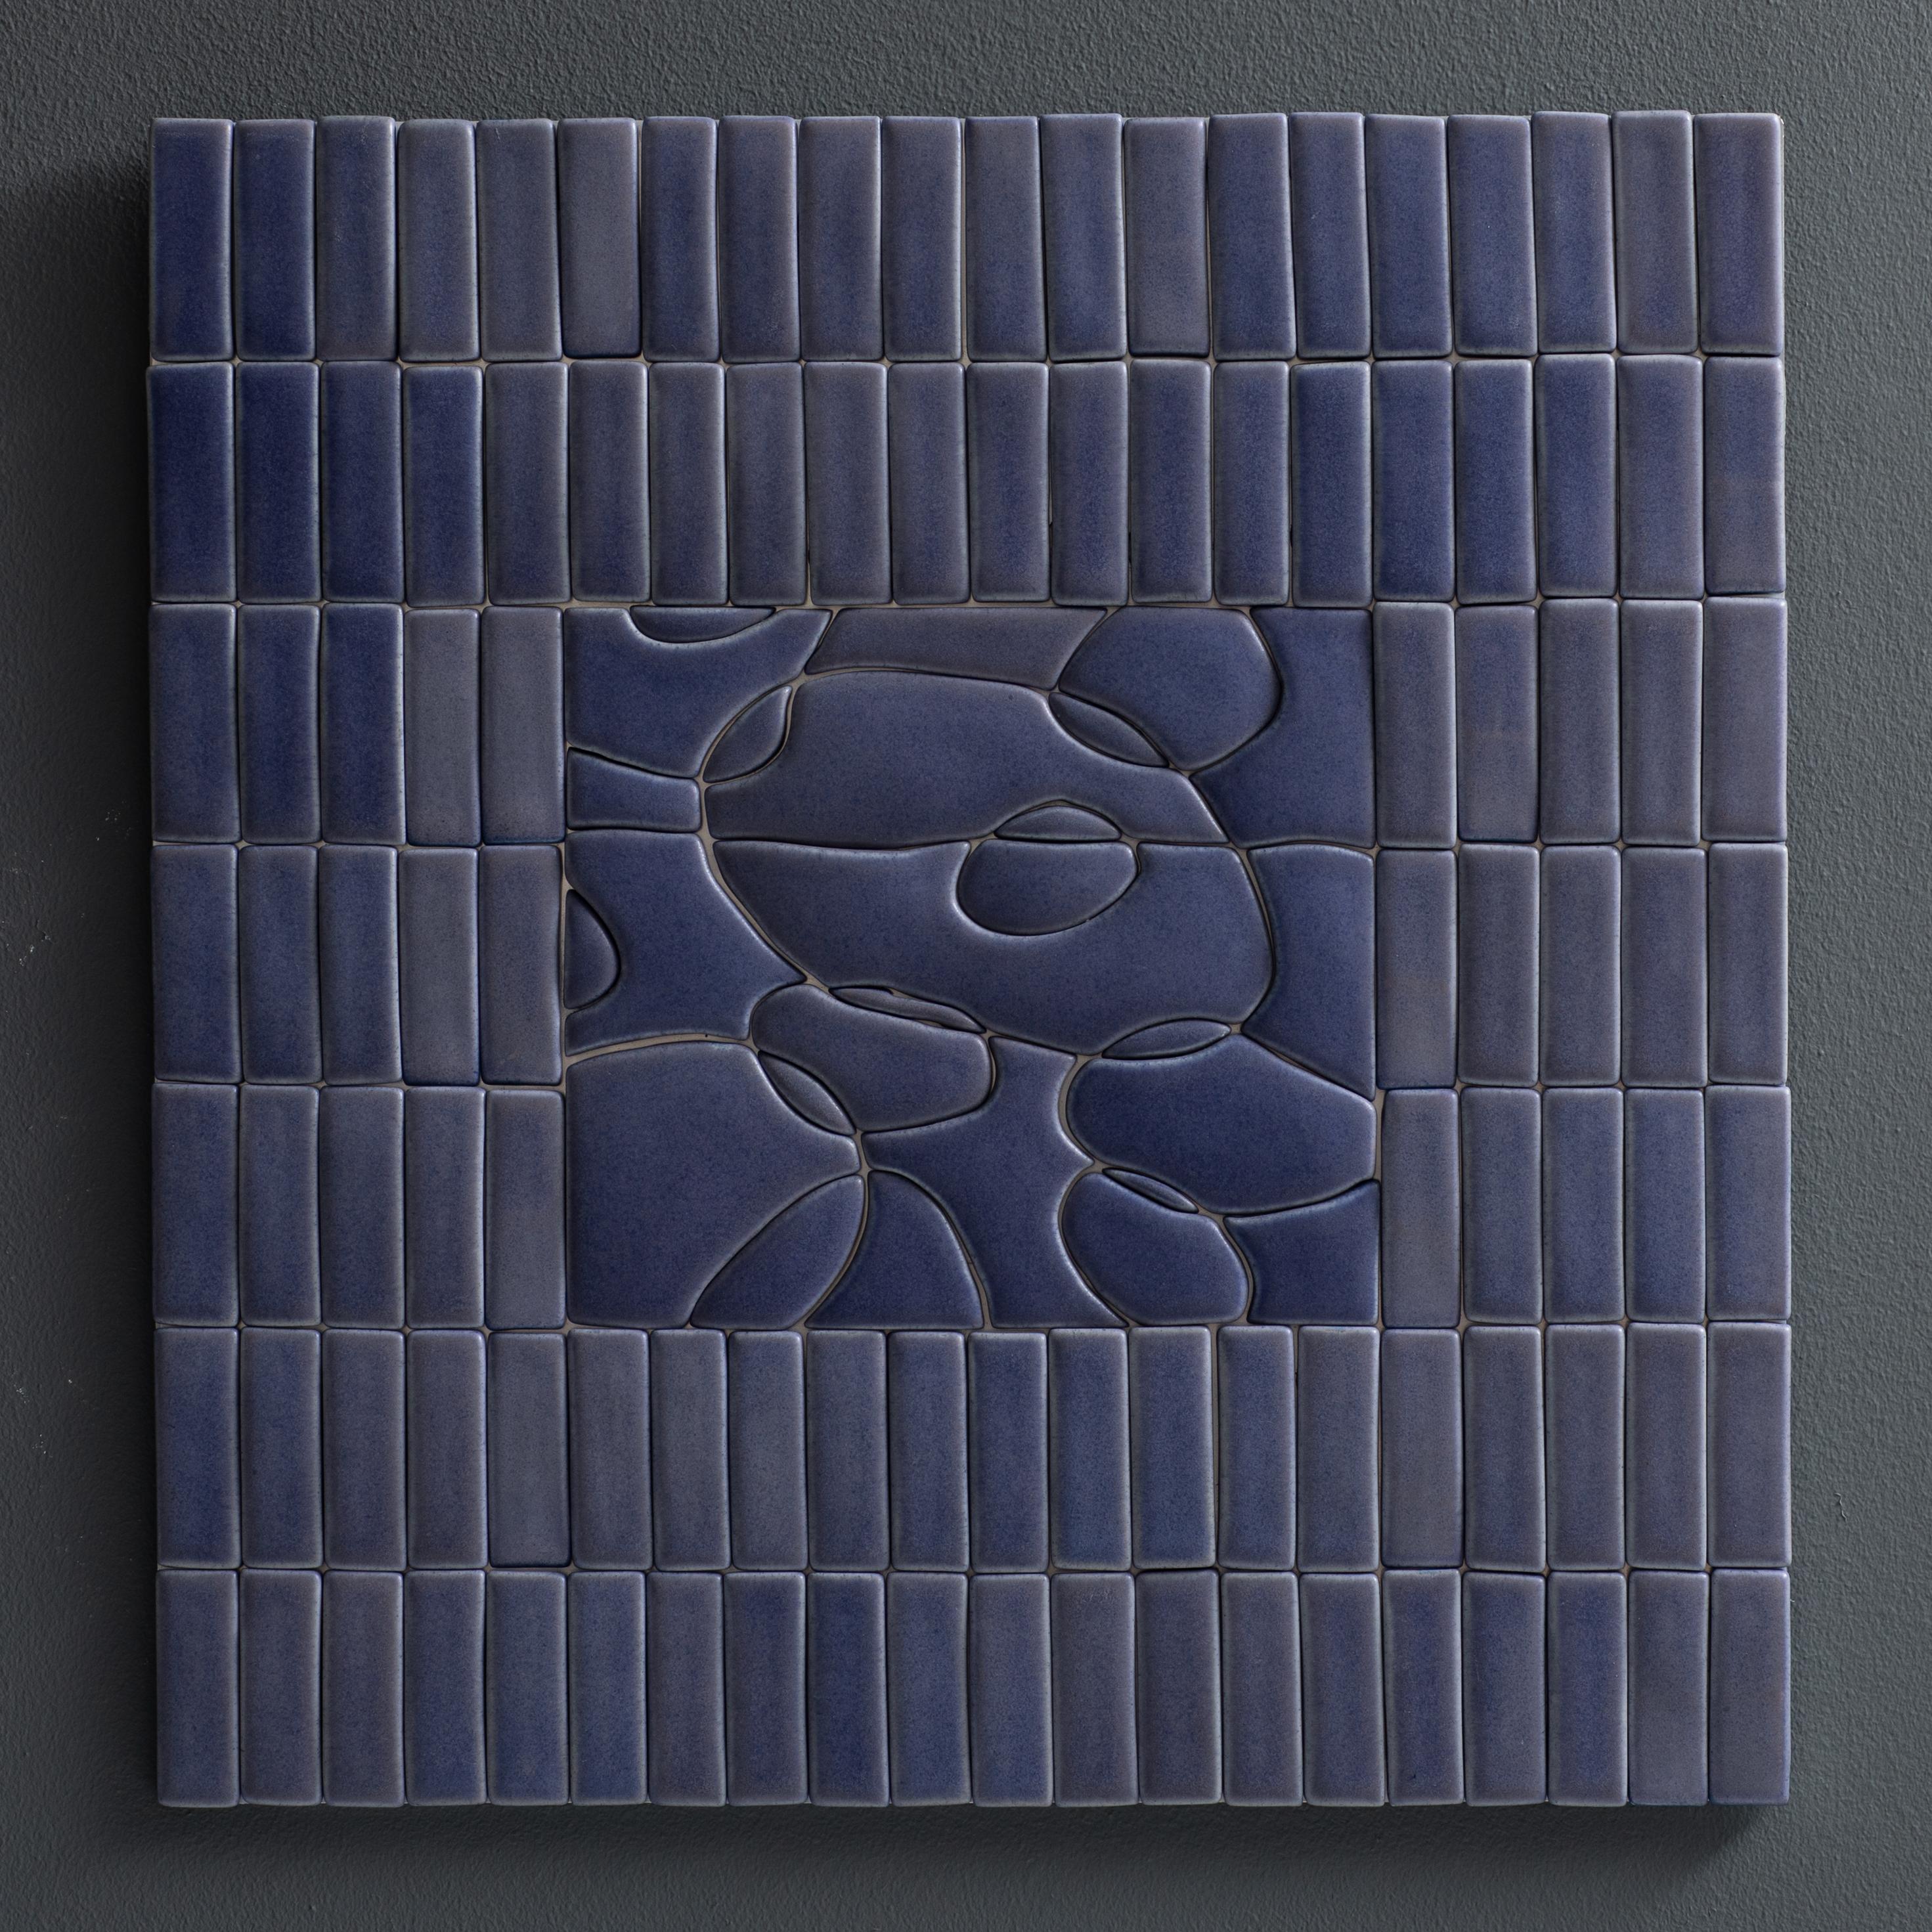 Title: Blue Mosaic, Kirsi Kivivirta (b. 1959, Finland)

Kirsi Kivivirta belongs to the Finnish contemporary ceramic elite, pushing the rich ceramic heritage of Finland forward. After finishing her Master of Arts in 1985 she has become widely known